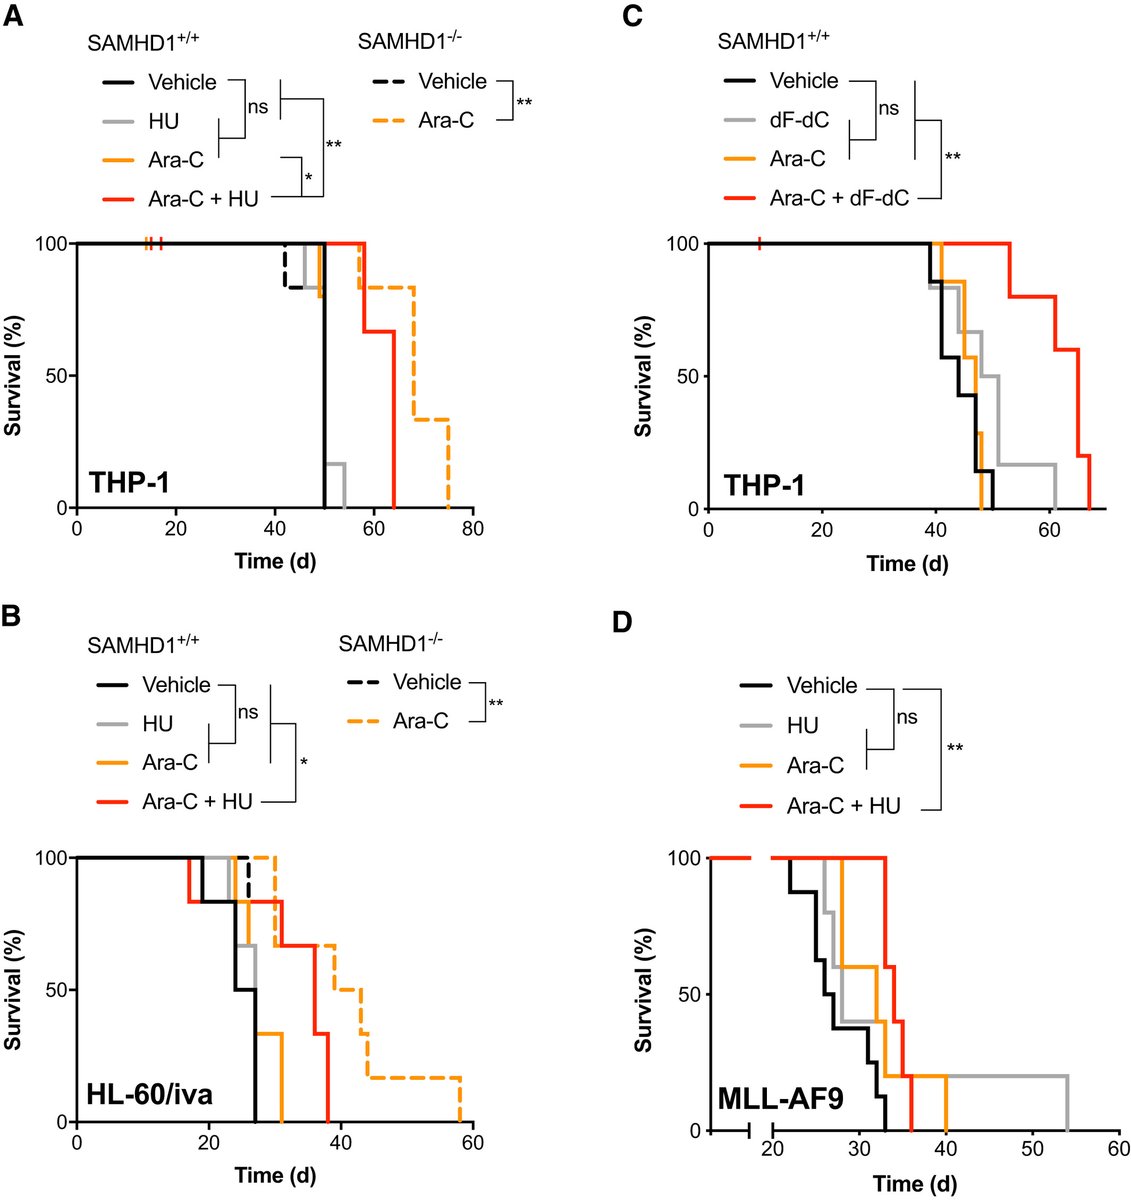 We also evaluated this combination in vivo, such as in a mouse AML model that is fairly resistant to ara-C owing to high SAMHD1 expression, and addition of an RNRi can overcome this barrier to ara-C efficacy without increasing toxicity